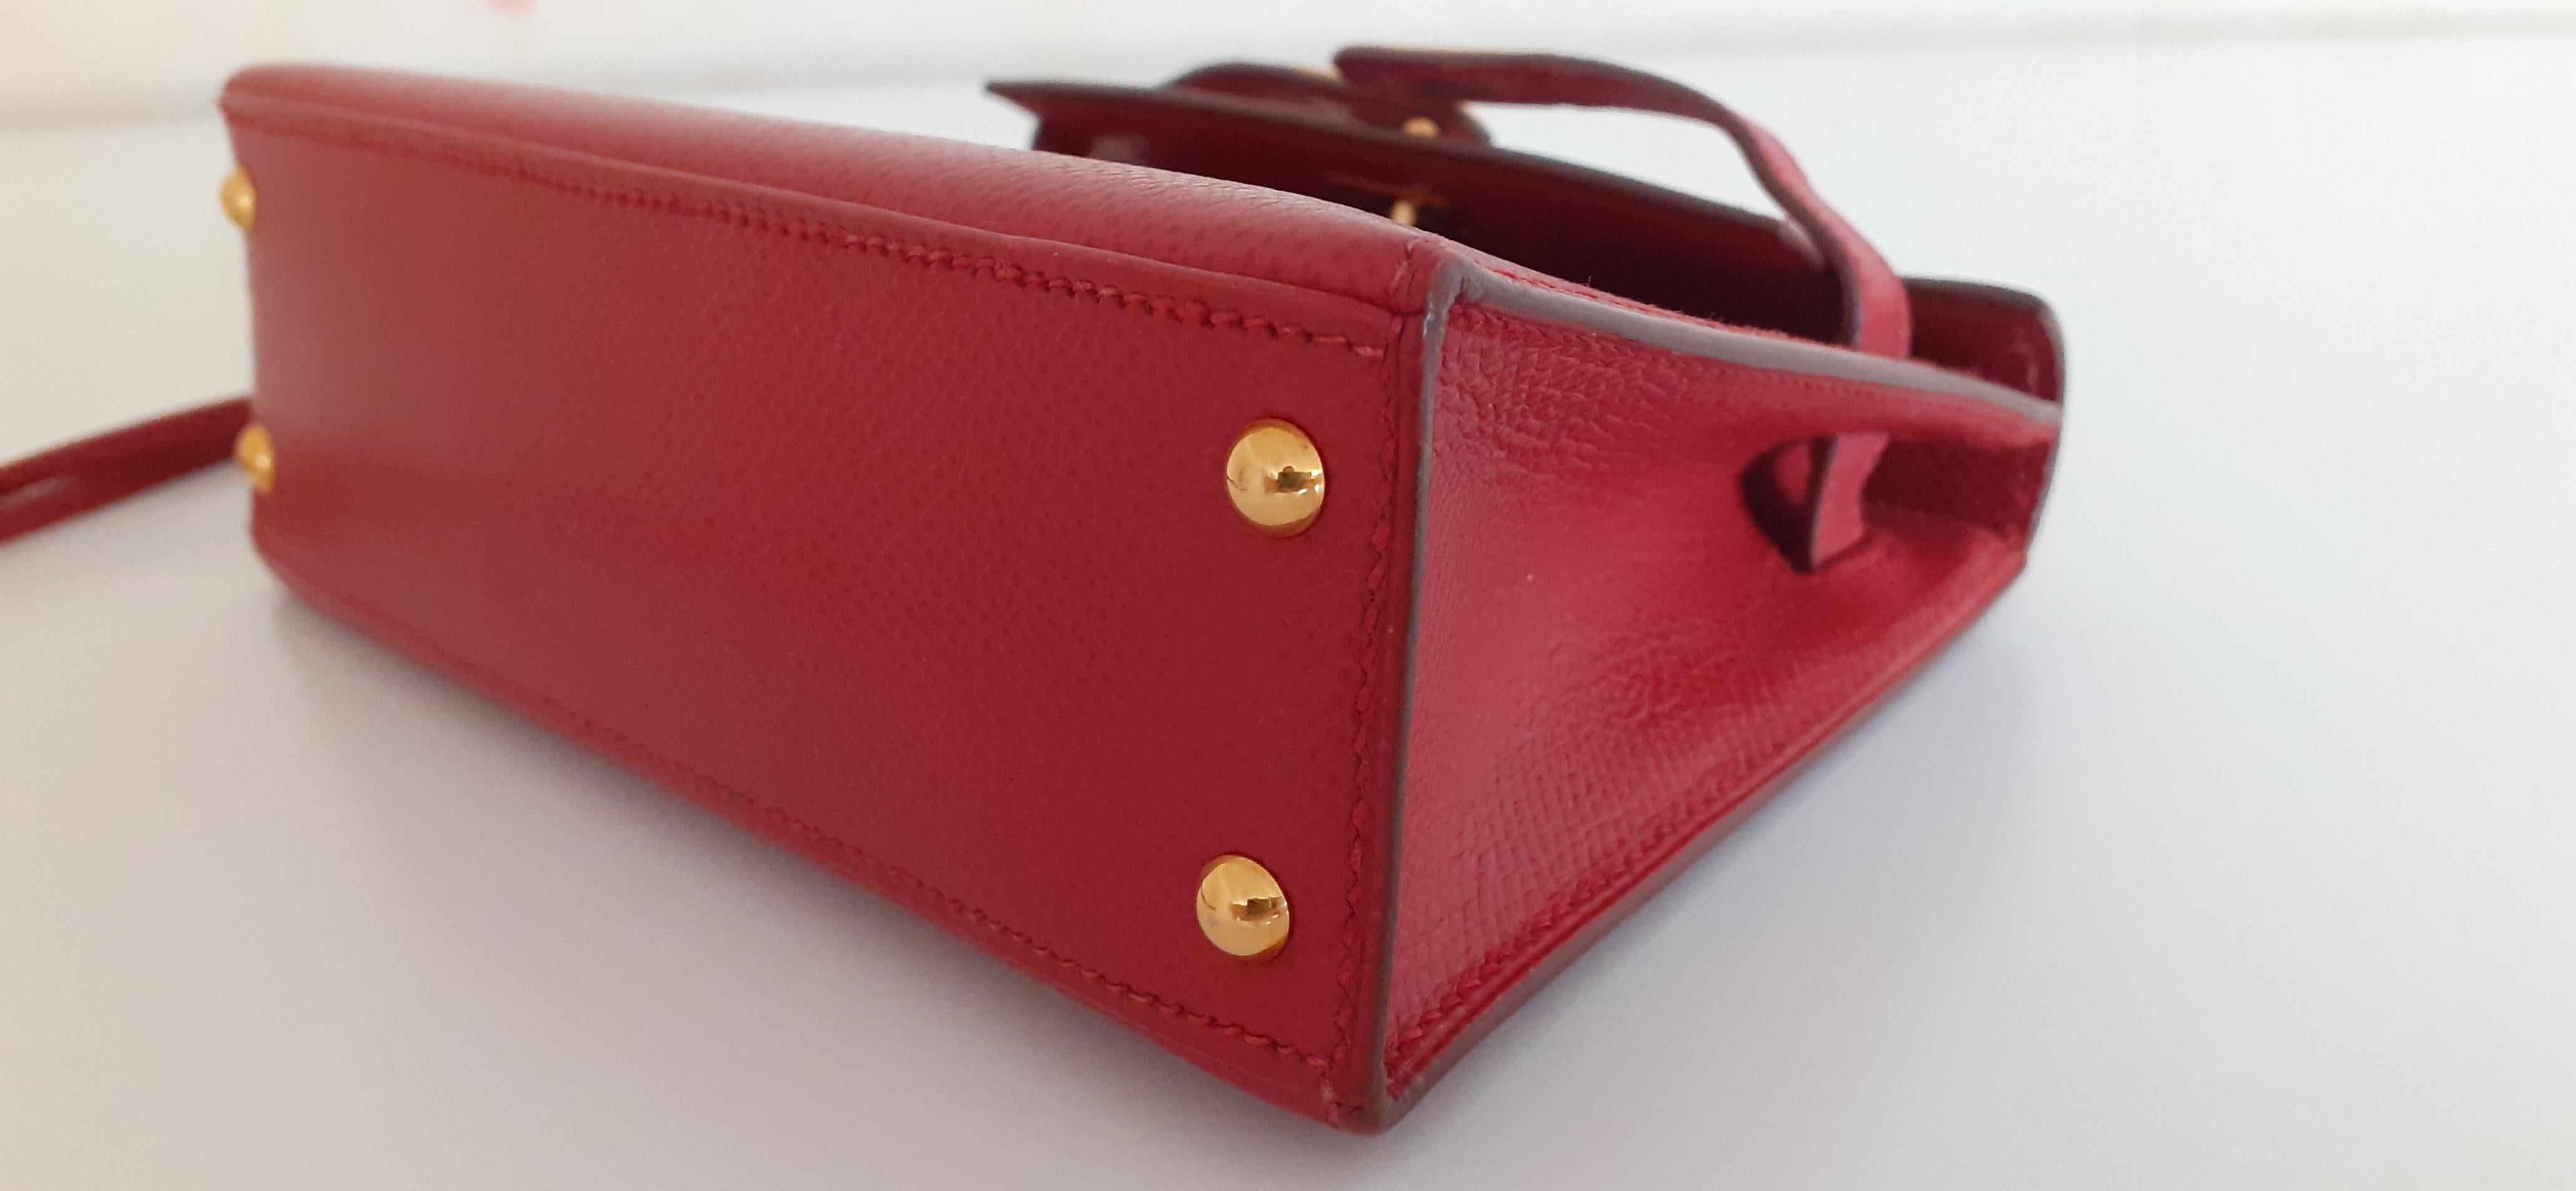 Exceptional Hermès Vintage Micro Kelly 15 cm Sellier Bag Red Leather Gold Hdw For Sale 5